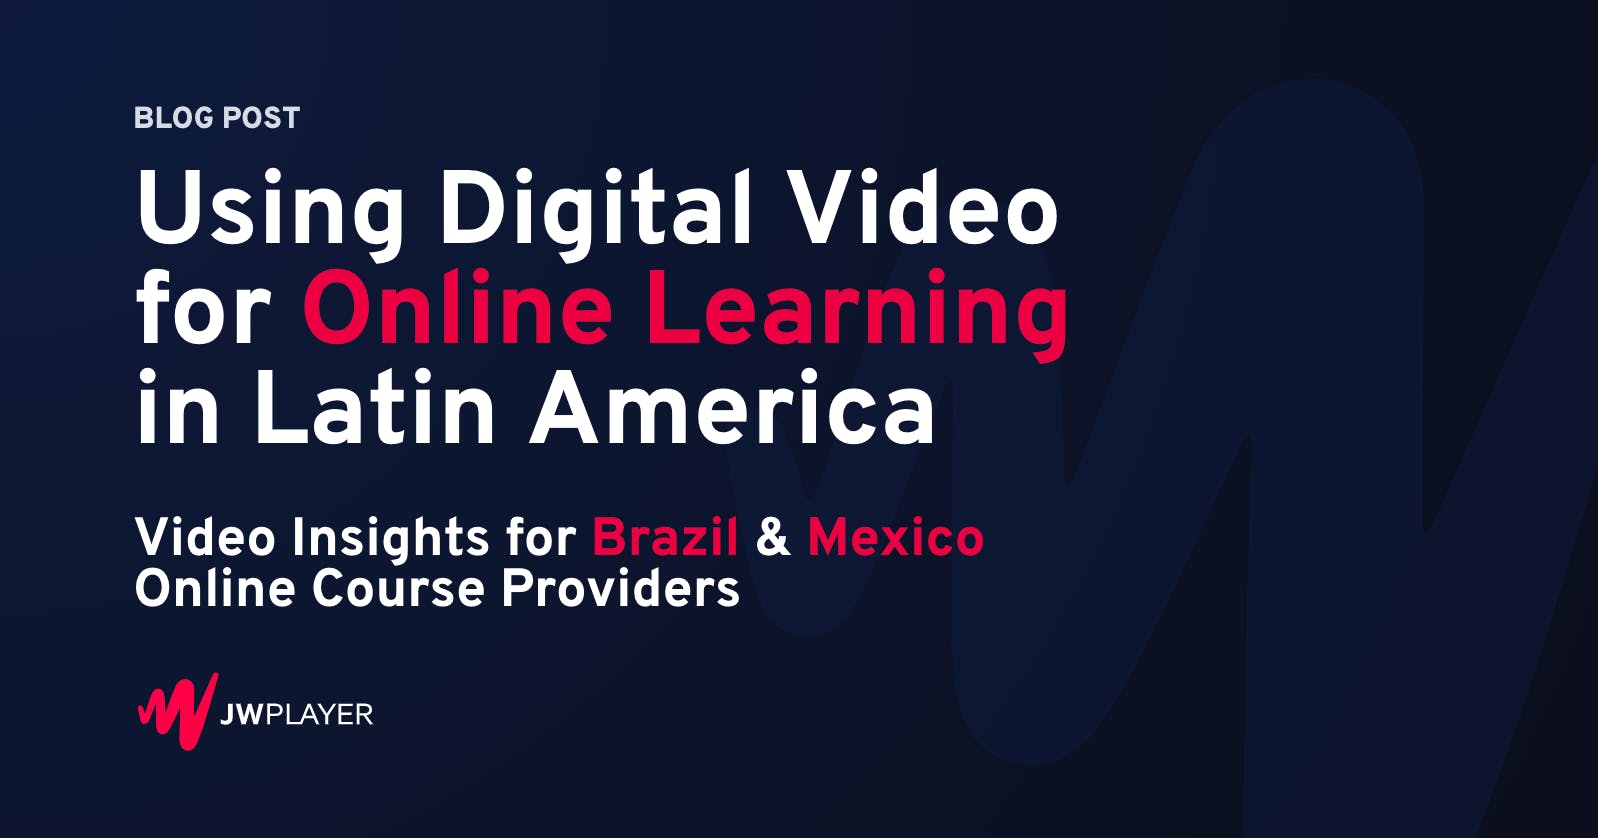 Online Course Providers for Continuing Education in Latin America (Brazil, Mexico)